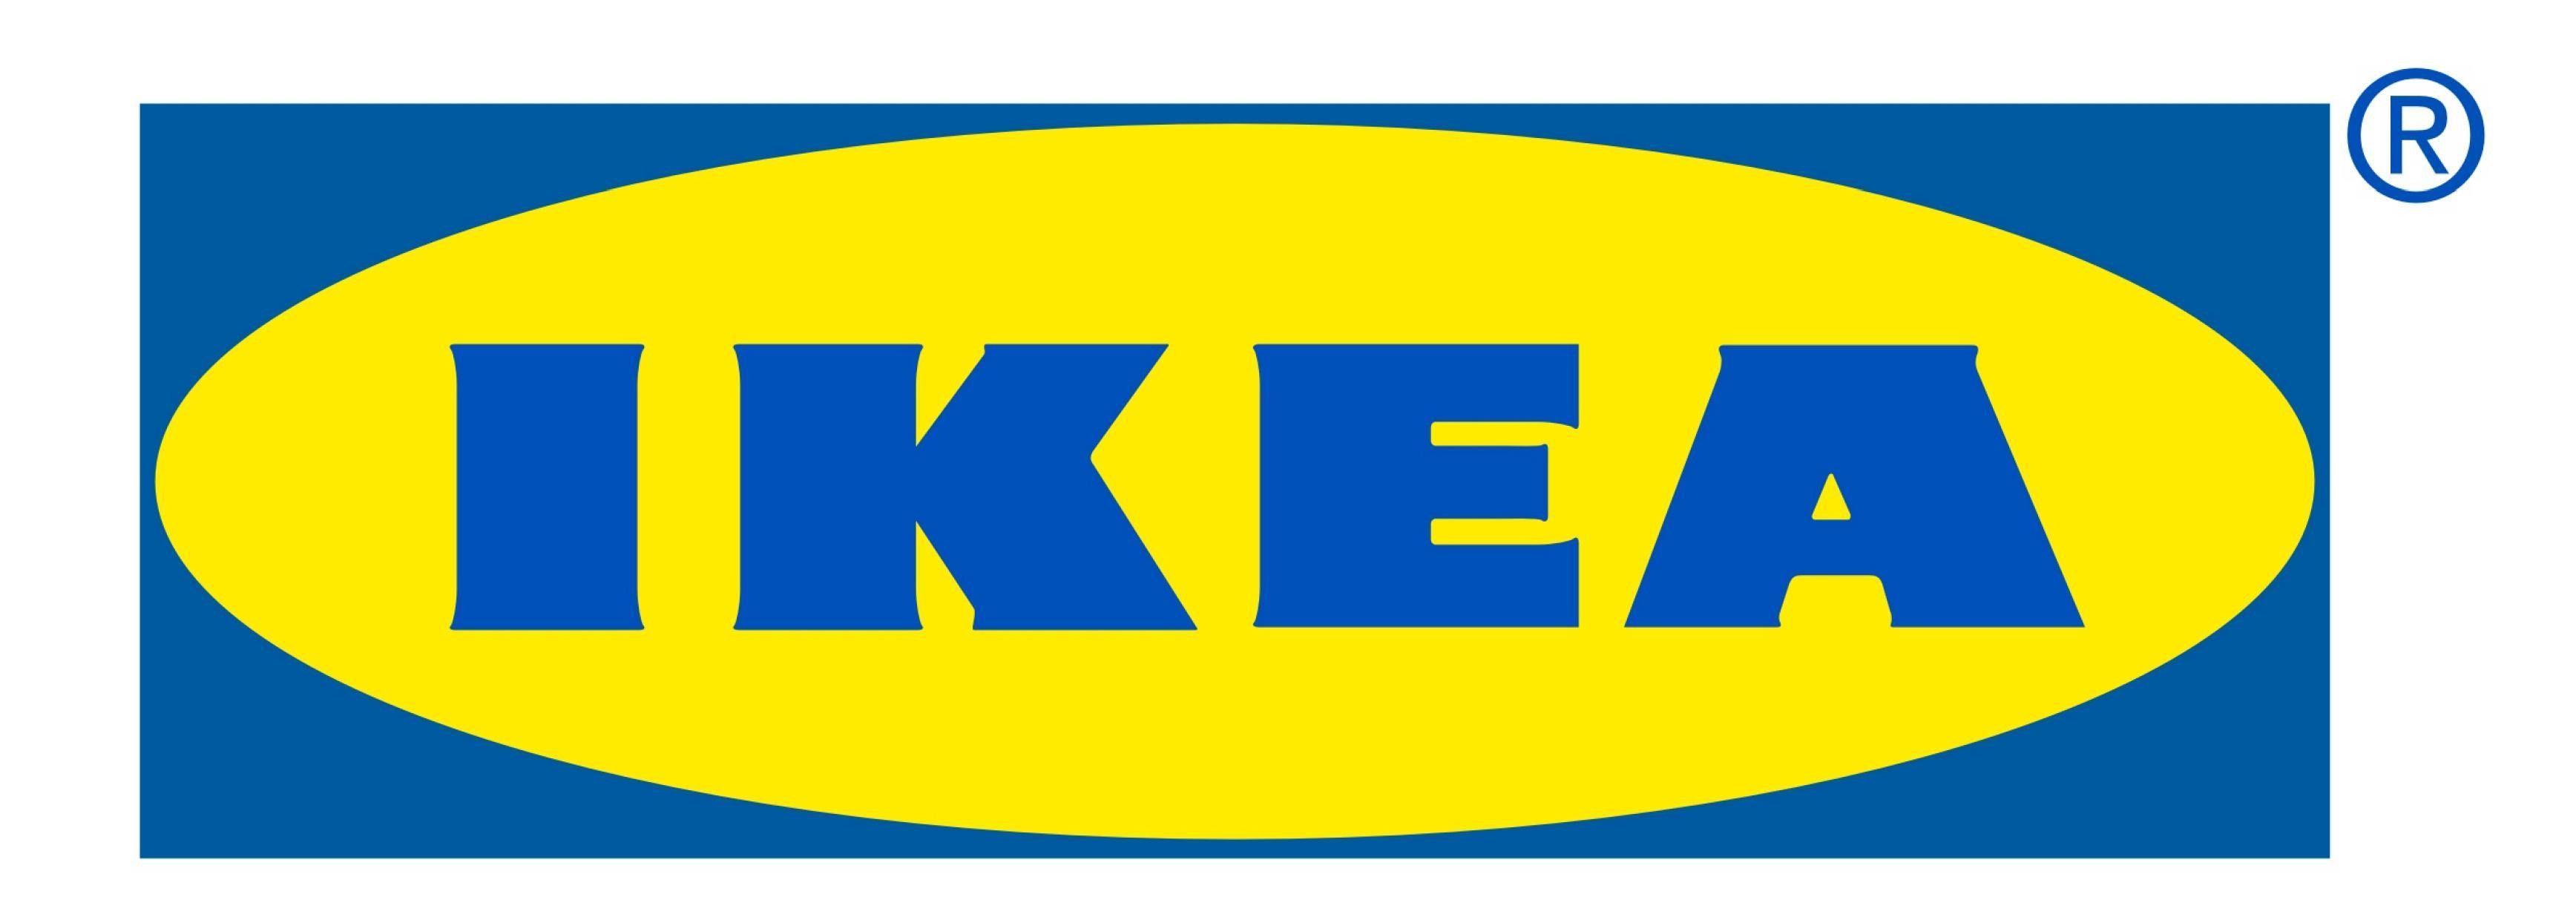 Yellow and Blue Company Logo - IKEA Logo (شعار شركة ايكيا) PNG Transparent Background Download ...